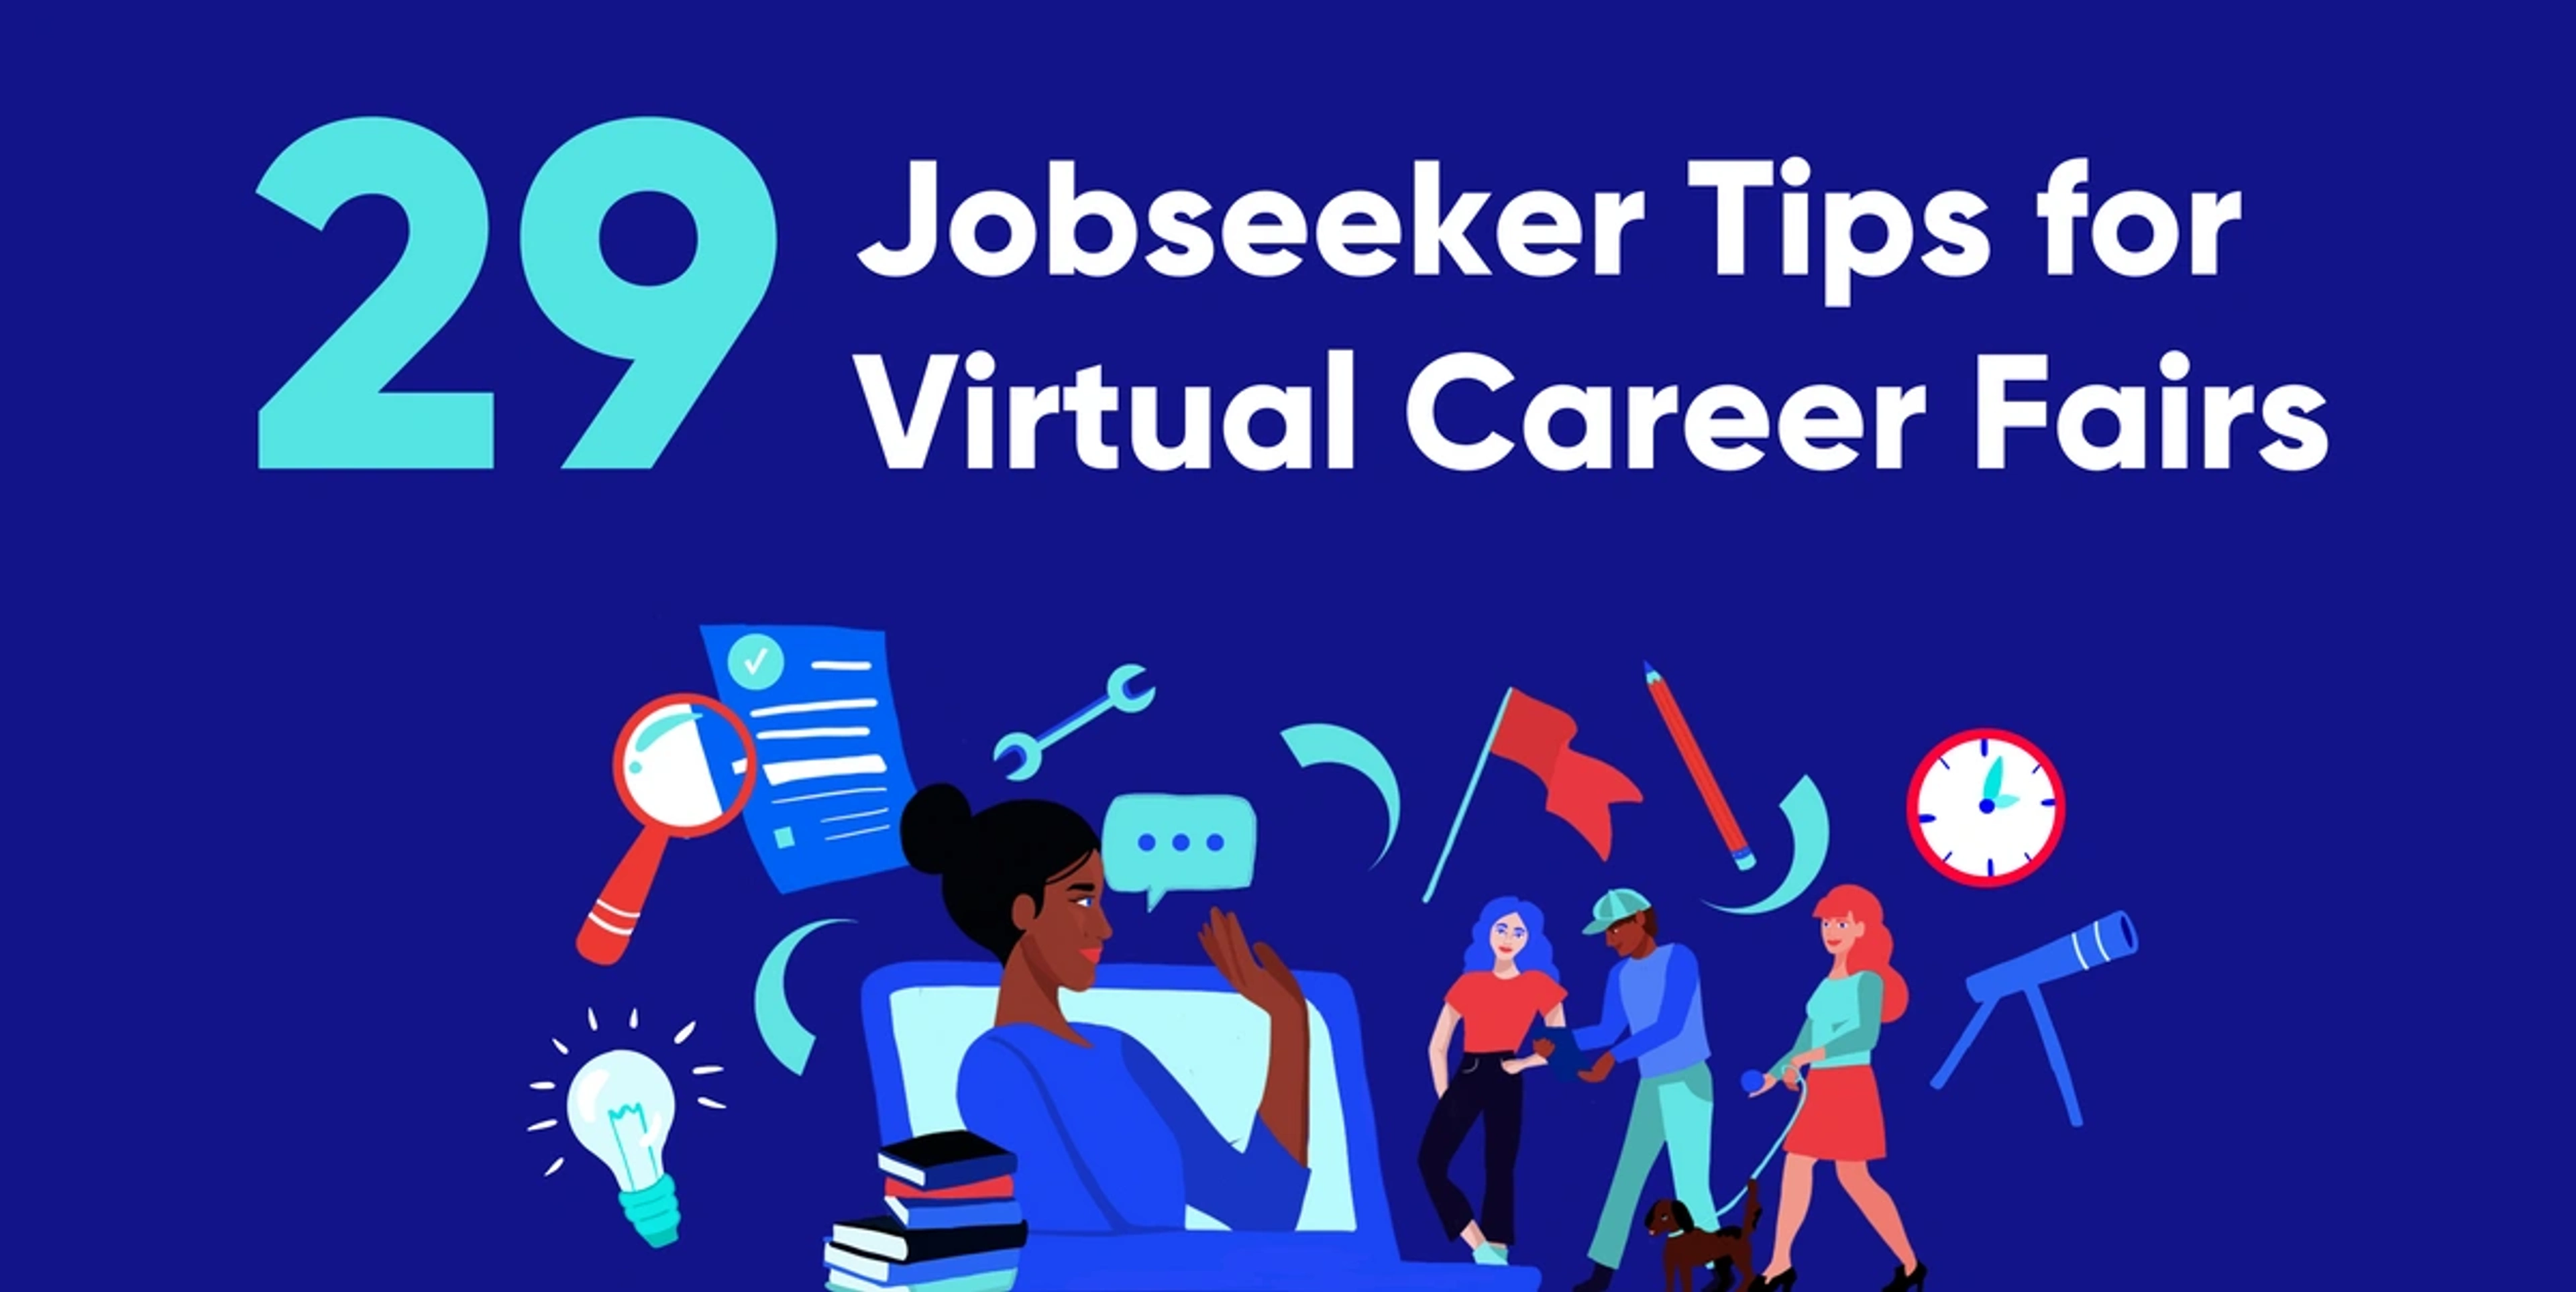 Ready, Set, Succeed: 29 Tips for Your First Virtual Career Fair